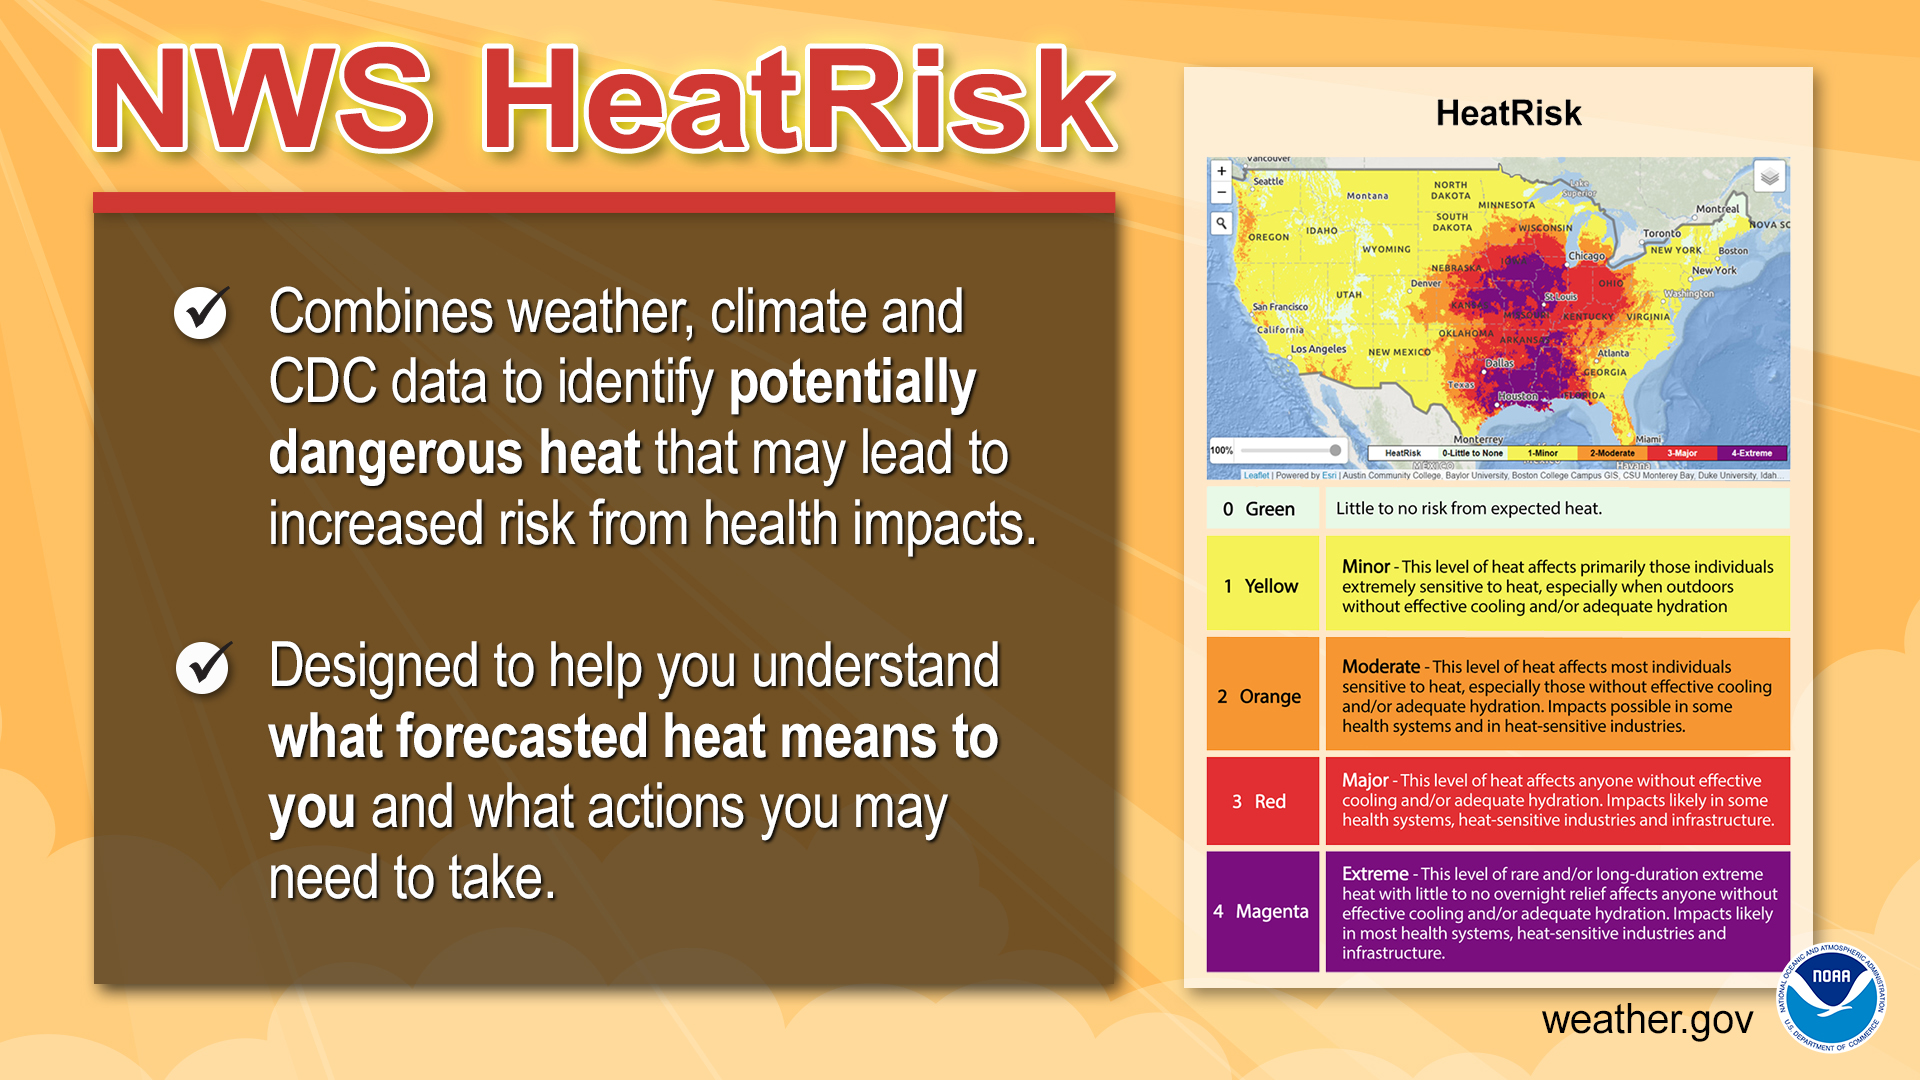 Image showing how HeatRisk uses NWS forecasts and climatology with CDC data to help identify the potential risks with extreme heat, especially for heat-sensitive populations. NWS HeatRisk combines weather, climate and CDC data to identify potential dangerous heat that may lead to increased risk from health impacts. It is designed to help you understand what forecasted heat means to you and what actions you may need to take.